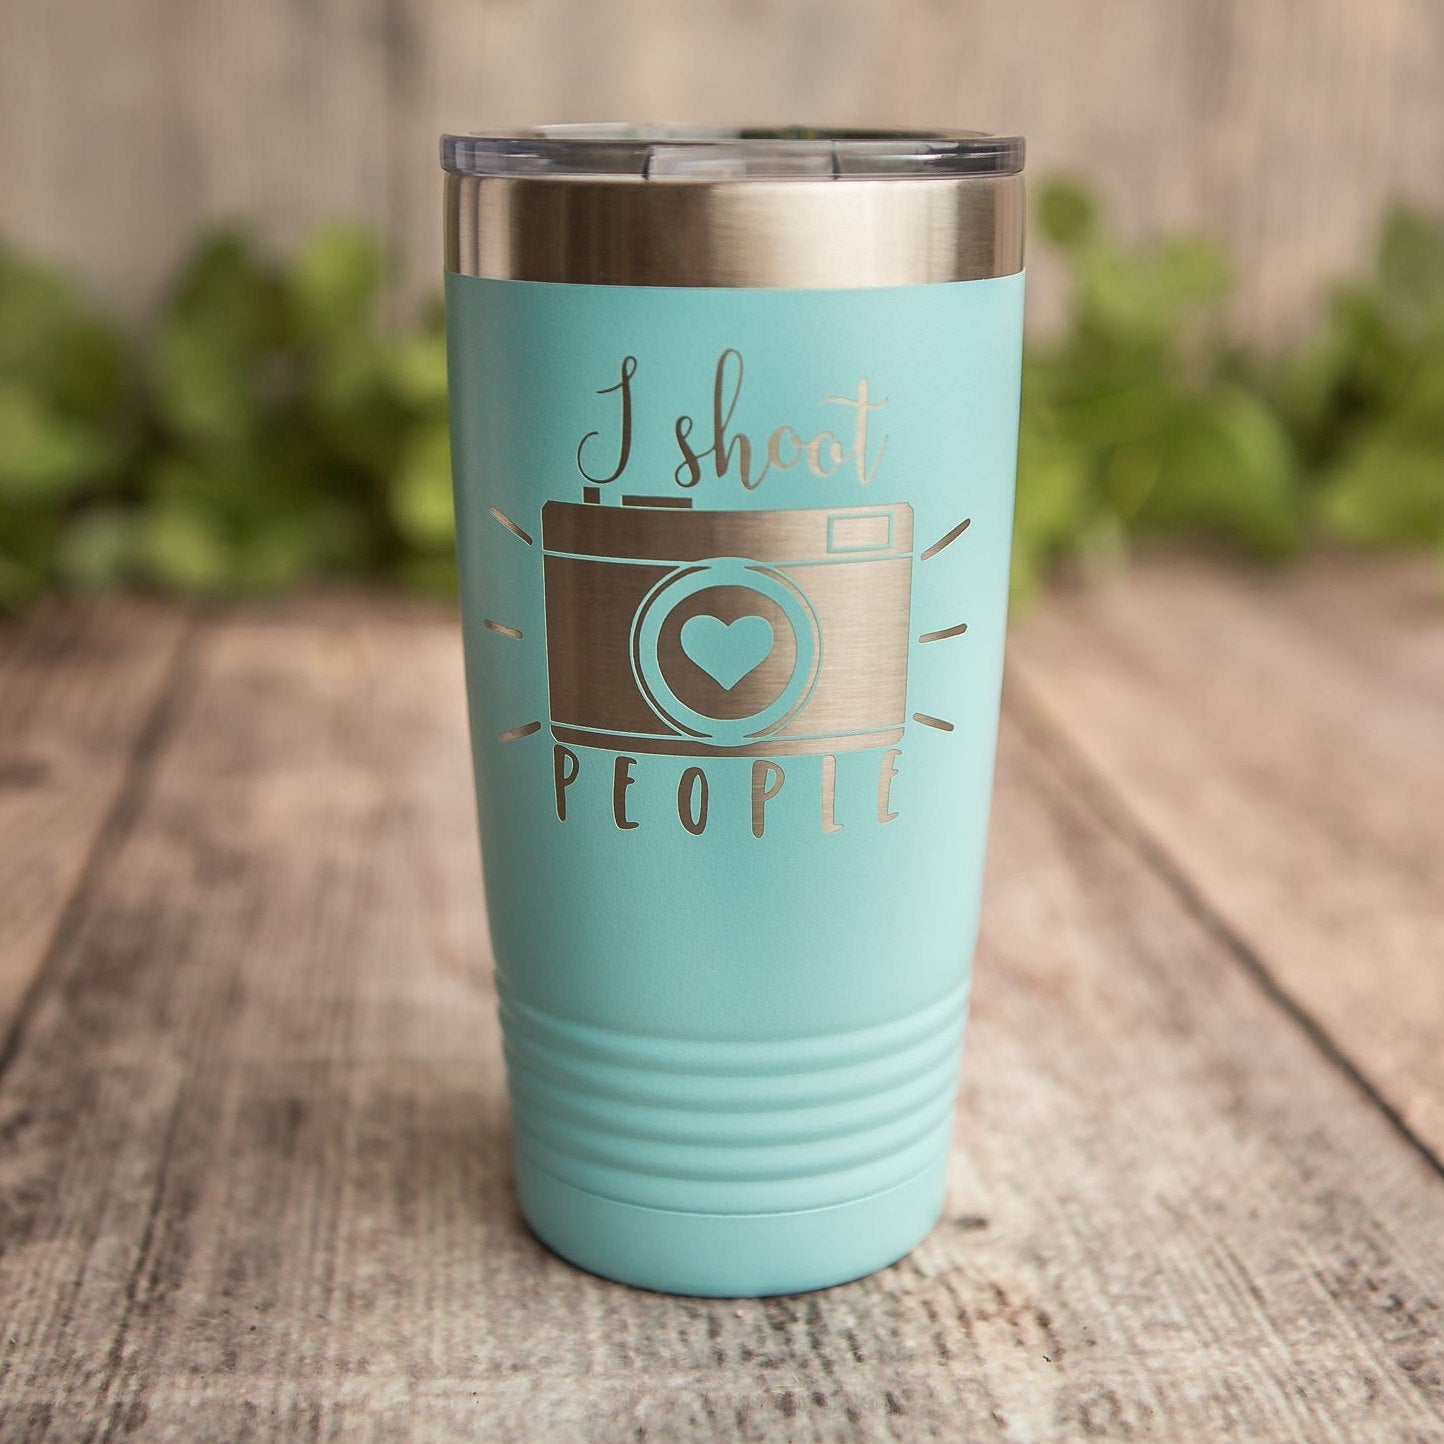 https://3cetching.com/wp-content/uploads/2020/09/i-shoot-people-engraved-photography-polar-camel-stainless-steel-tumbler-yeti-style-cup-photography-insulated-travel-tumbler-mug-gift-5f5fcb19.jpg